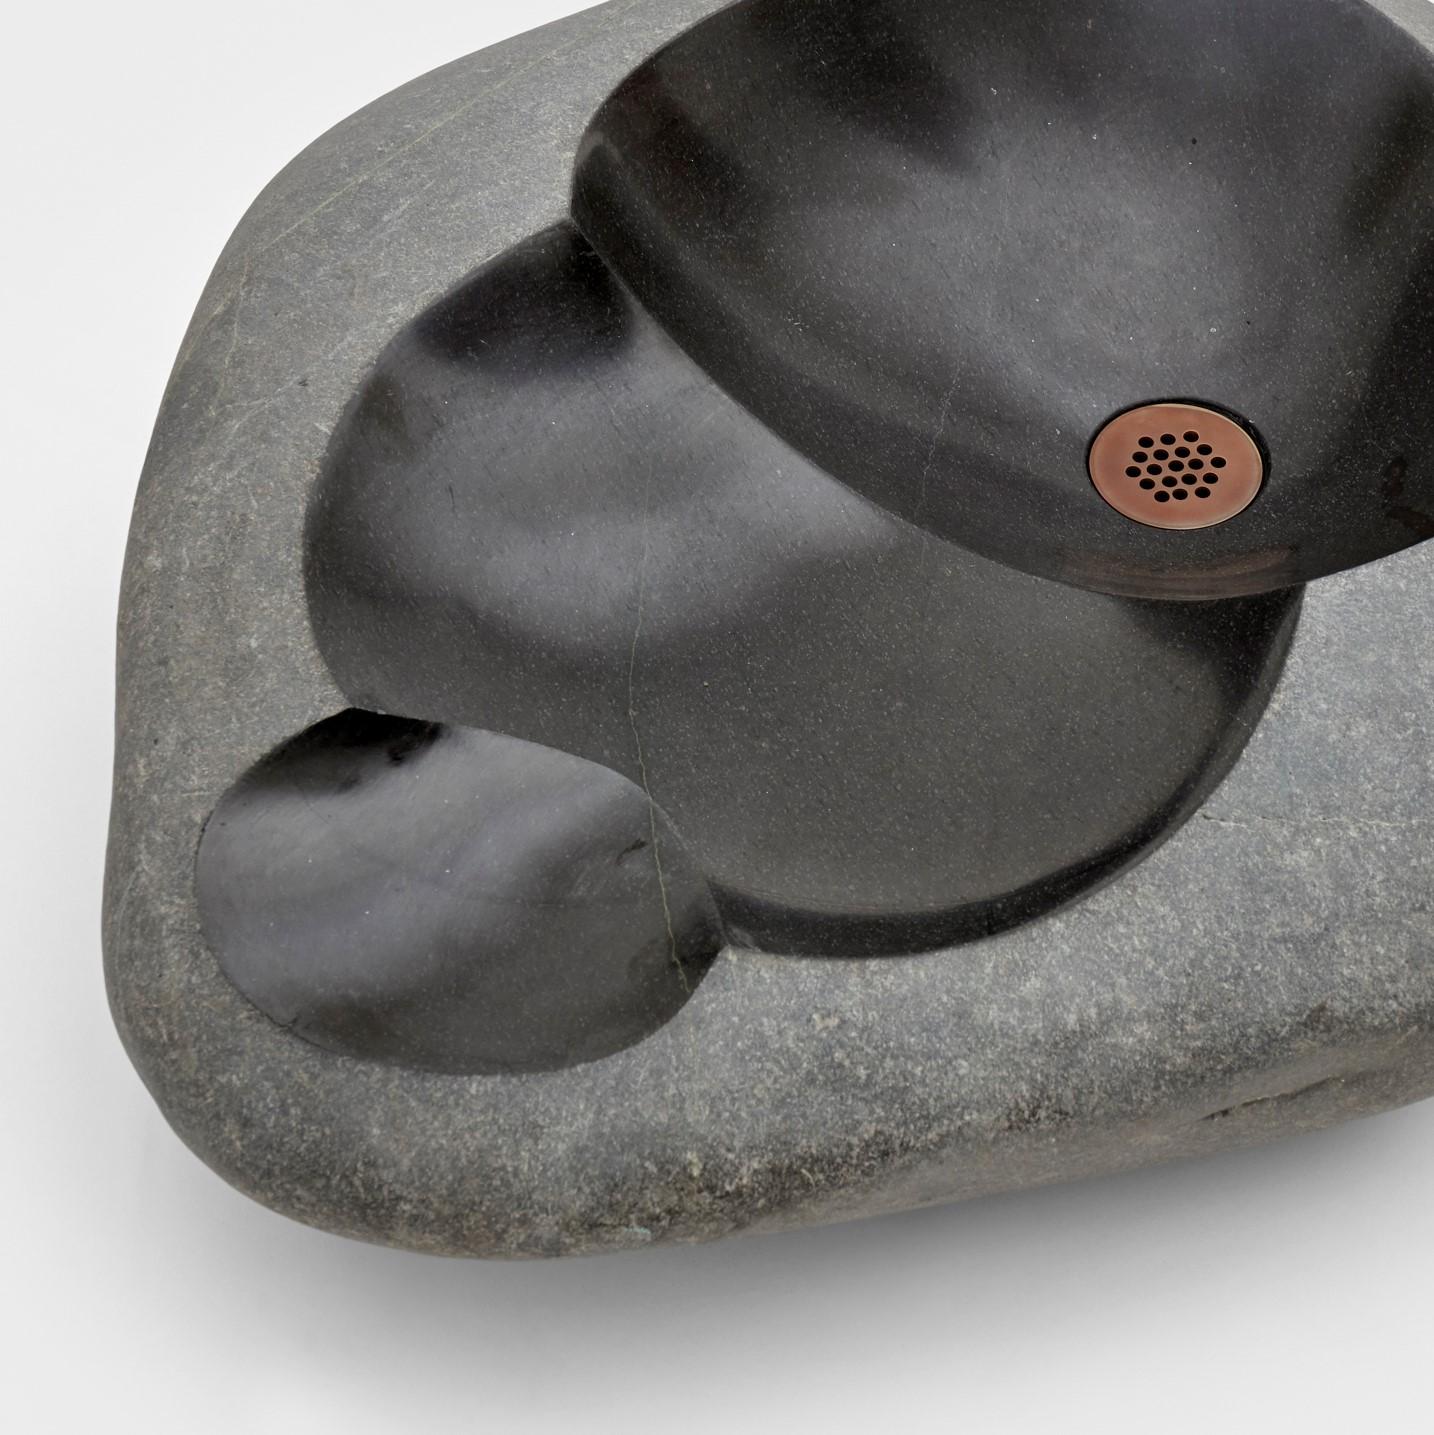 Rimac Stones N°3 by Estudio Rafael Freyre
Dimensions: W 70 D 47 x H 17 cm 
Materials: River Stones

Rimac Stones explores our hydrographic landscape and its interaction with the materiality of our territory. The water we use daily connects us